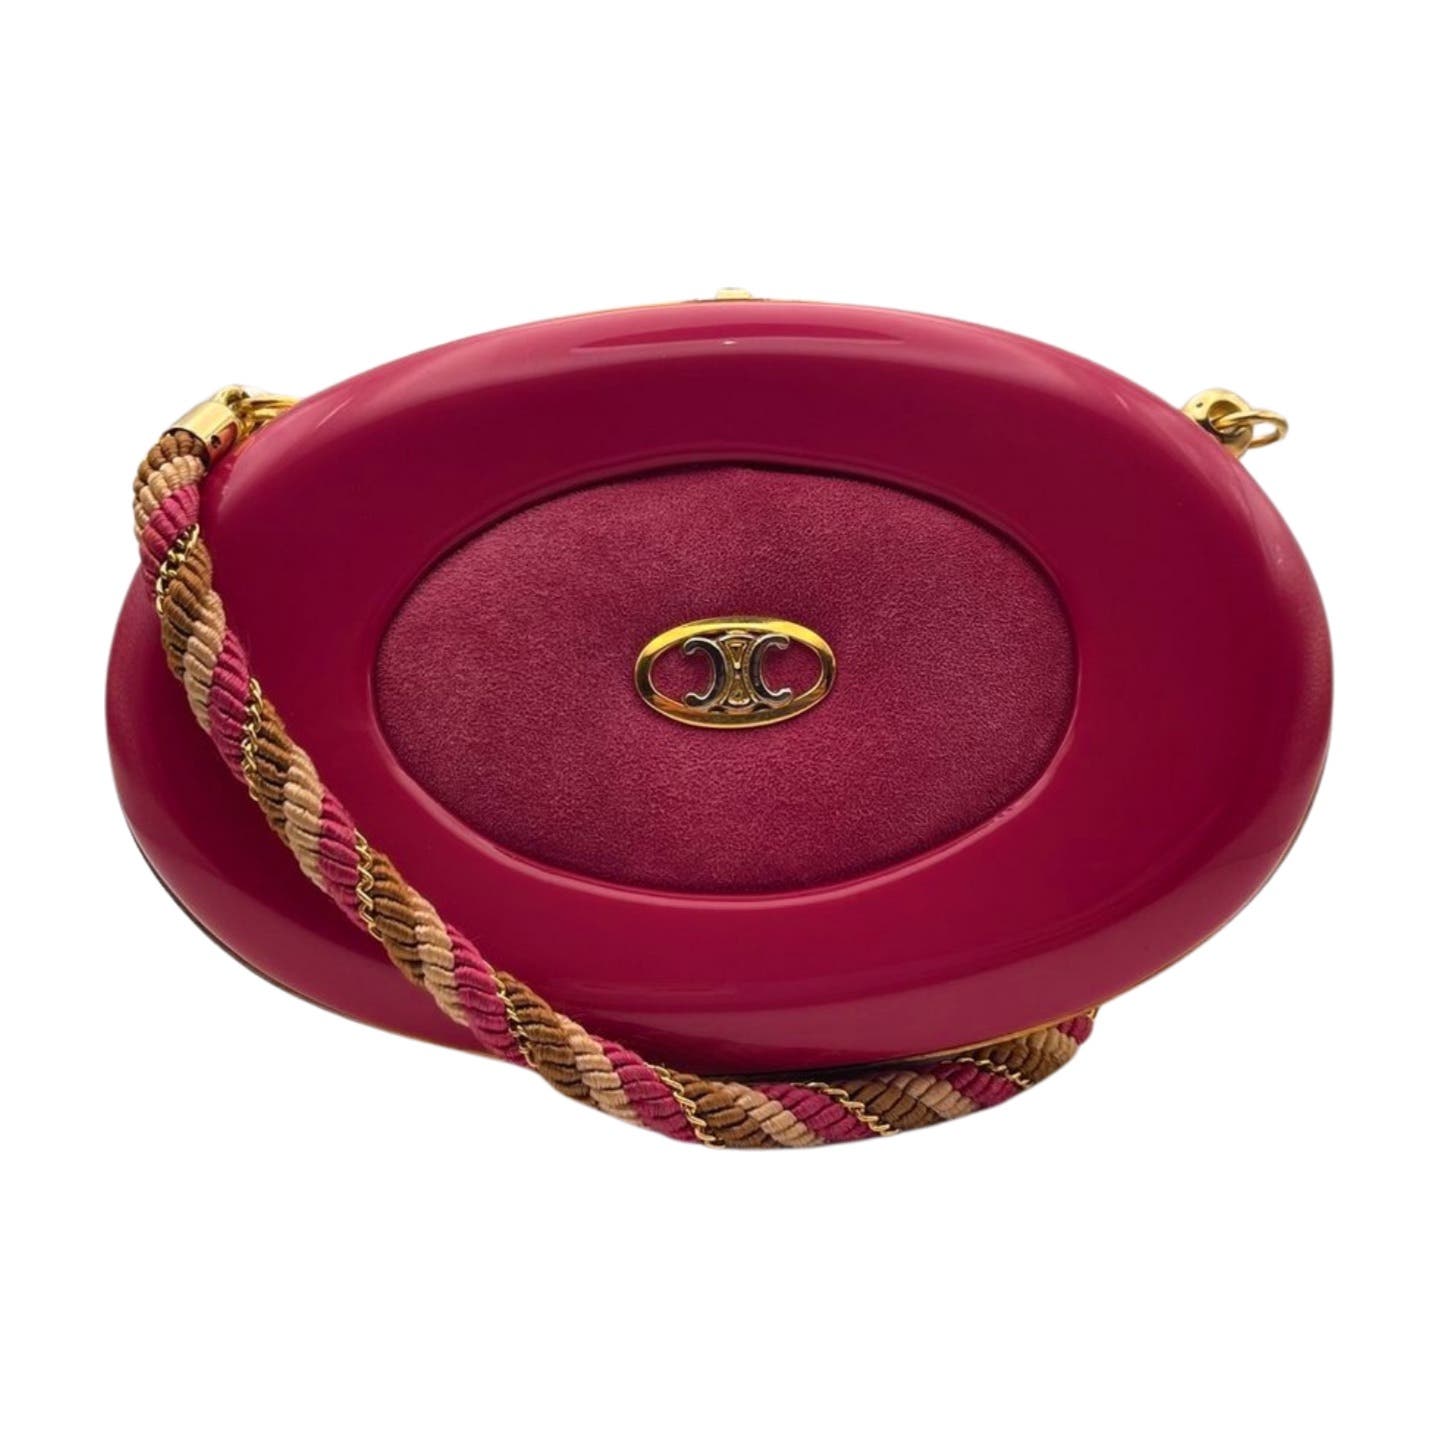 An oval-shaped designer handbag in glossy fuchsia with a center panel of textured fabric and a gold logo emblem. Featuring a multicolored, braided shoulder strap in pink, gold, and beige, this Vintage Celine Hard Shell Bag by Celine boasts an exquisite leather interior.